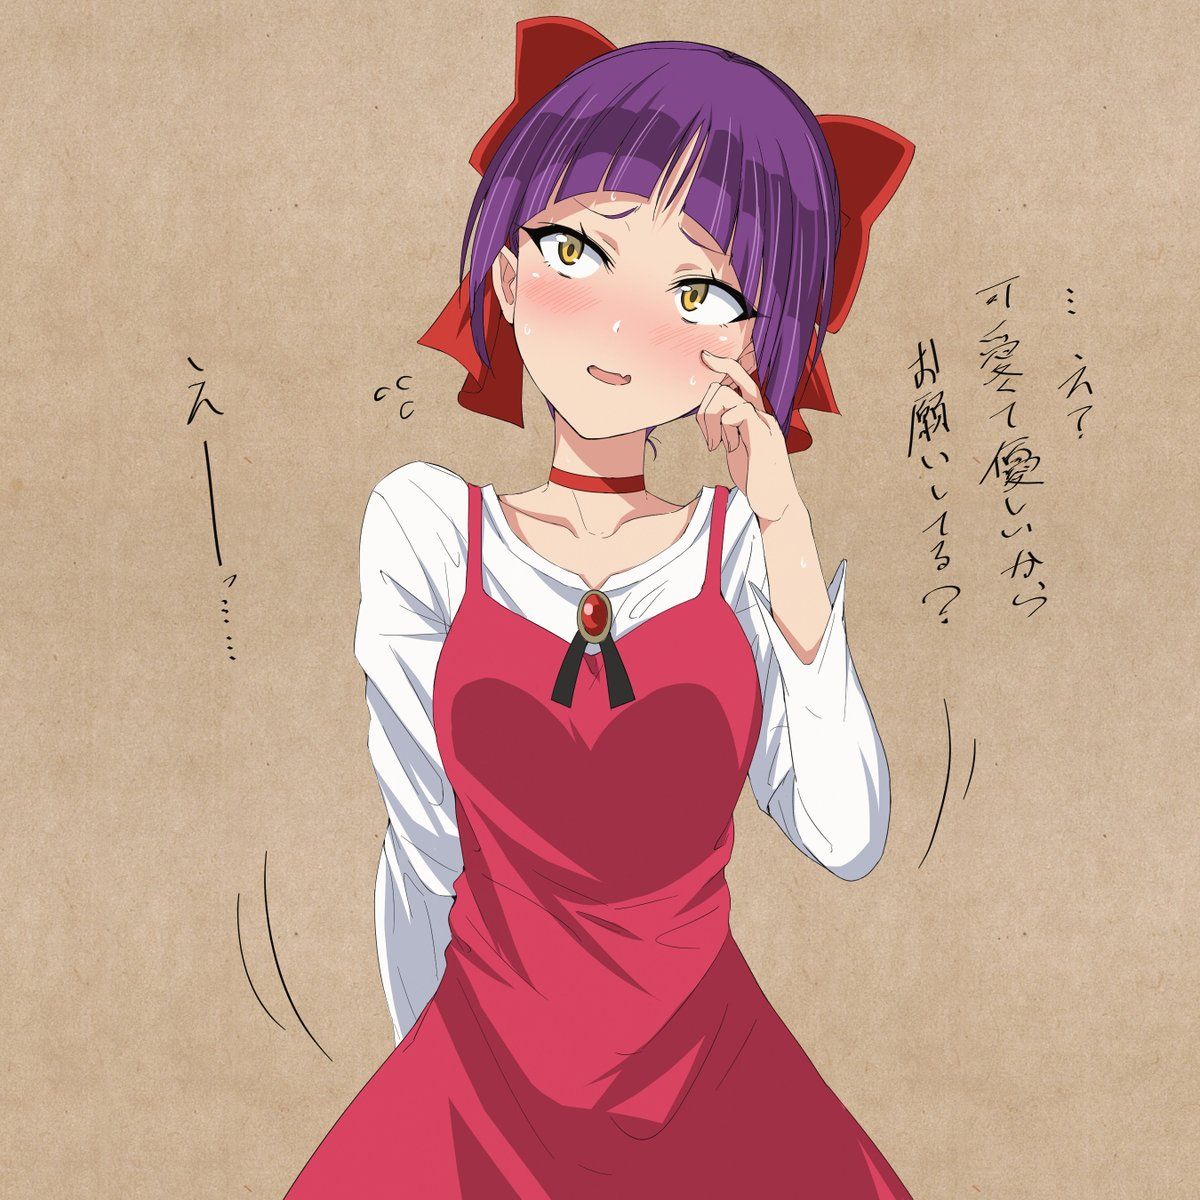 an anime character with purple hair wearing a red dress and cat ears on